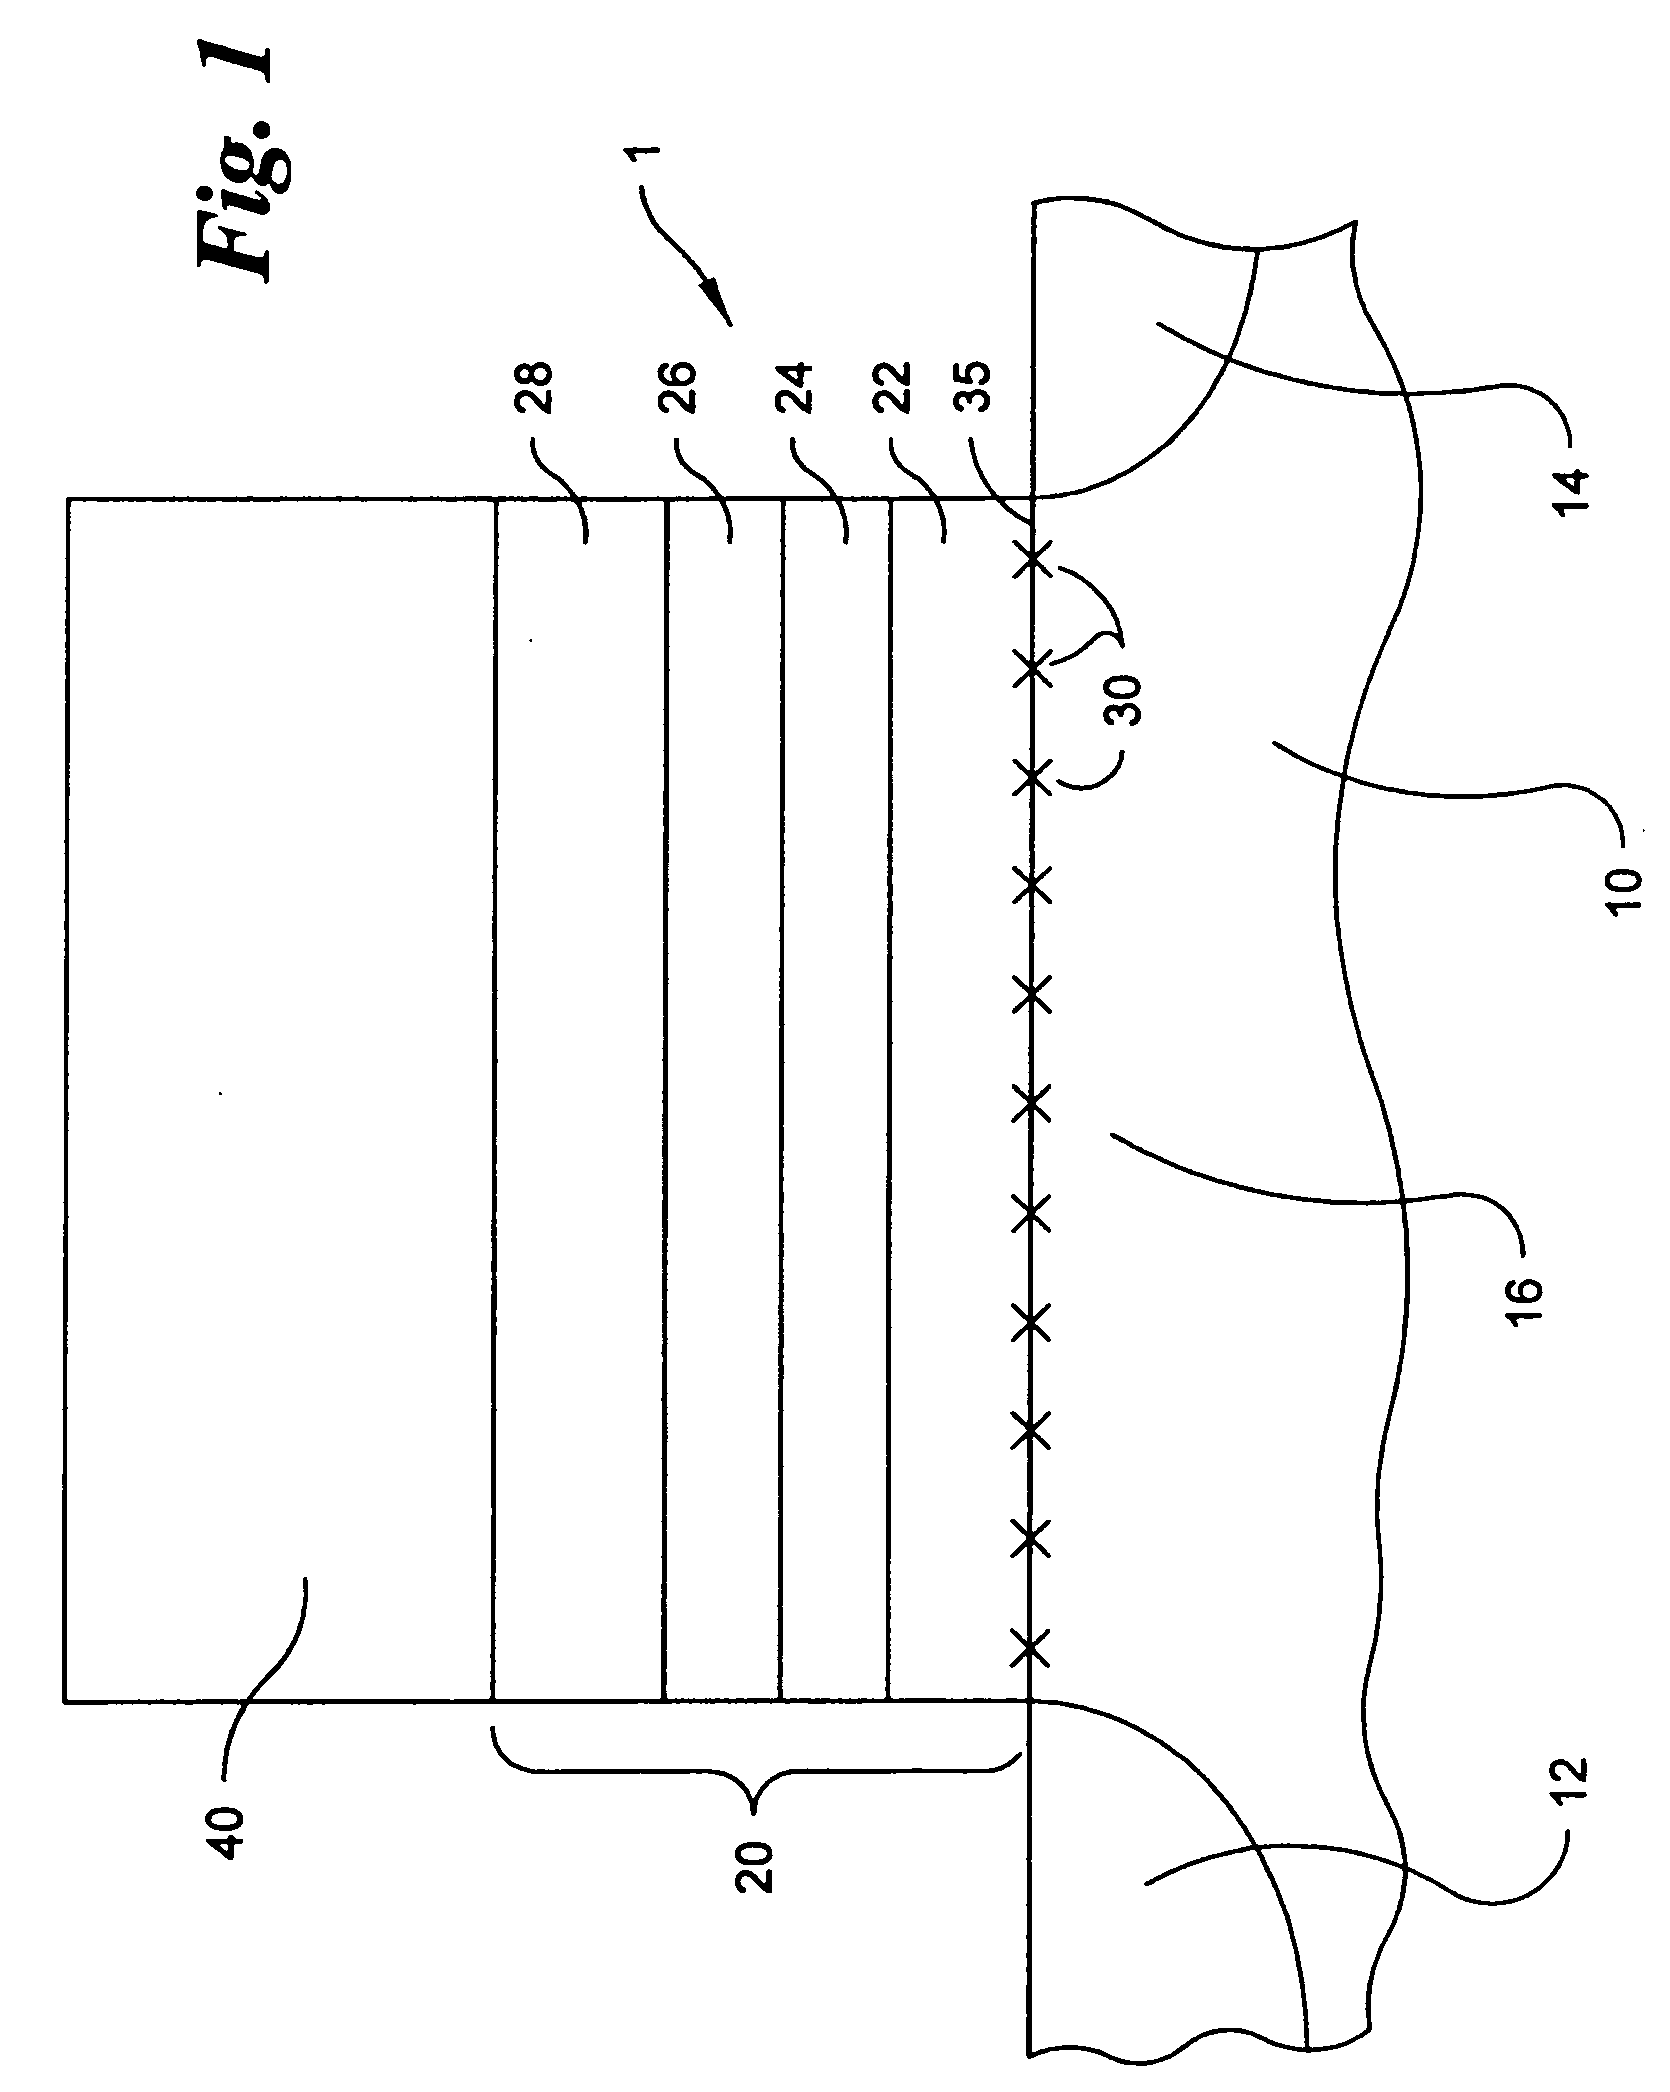 Low hydrogen concentration charge-trapping layer structures for non-volatile memory and methods of forming the same